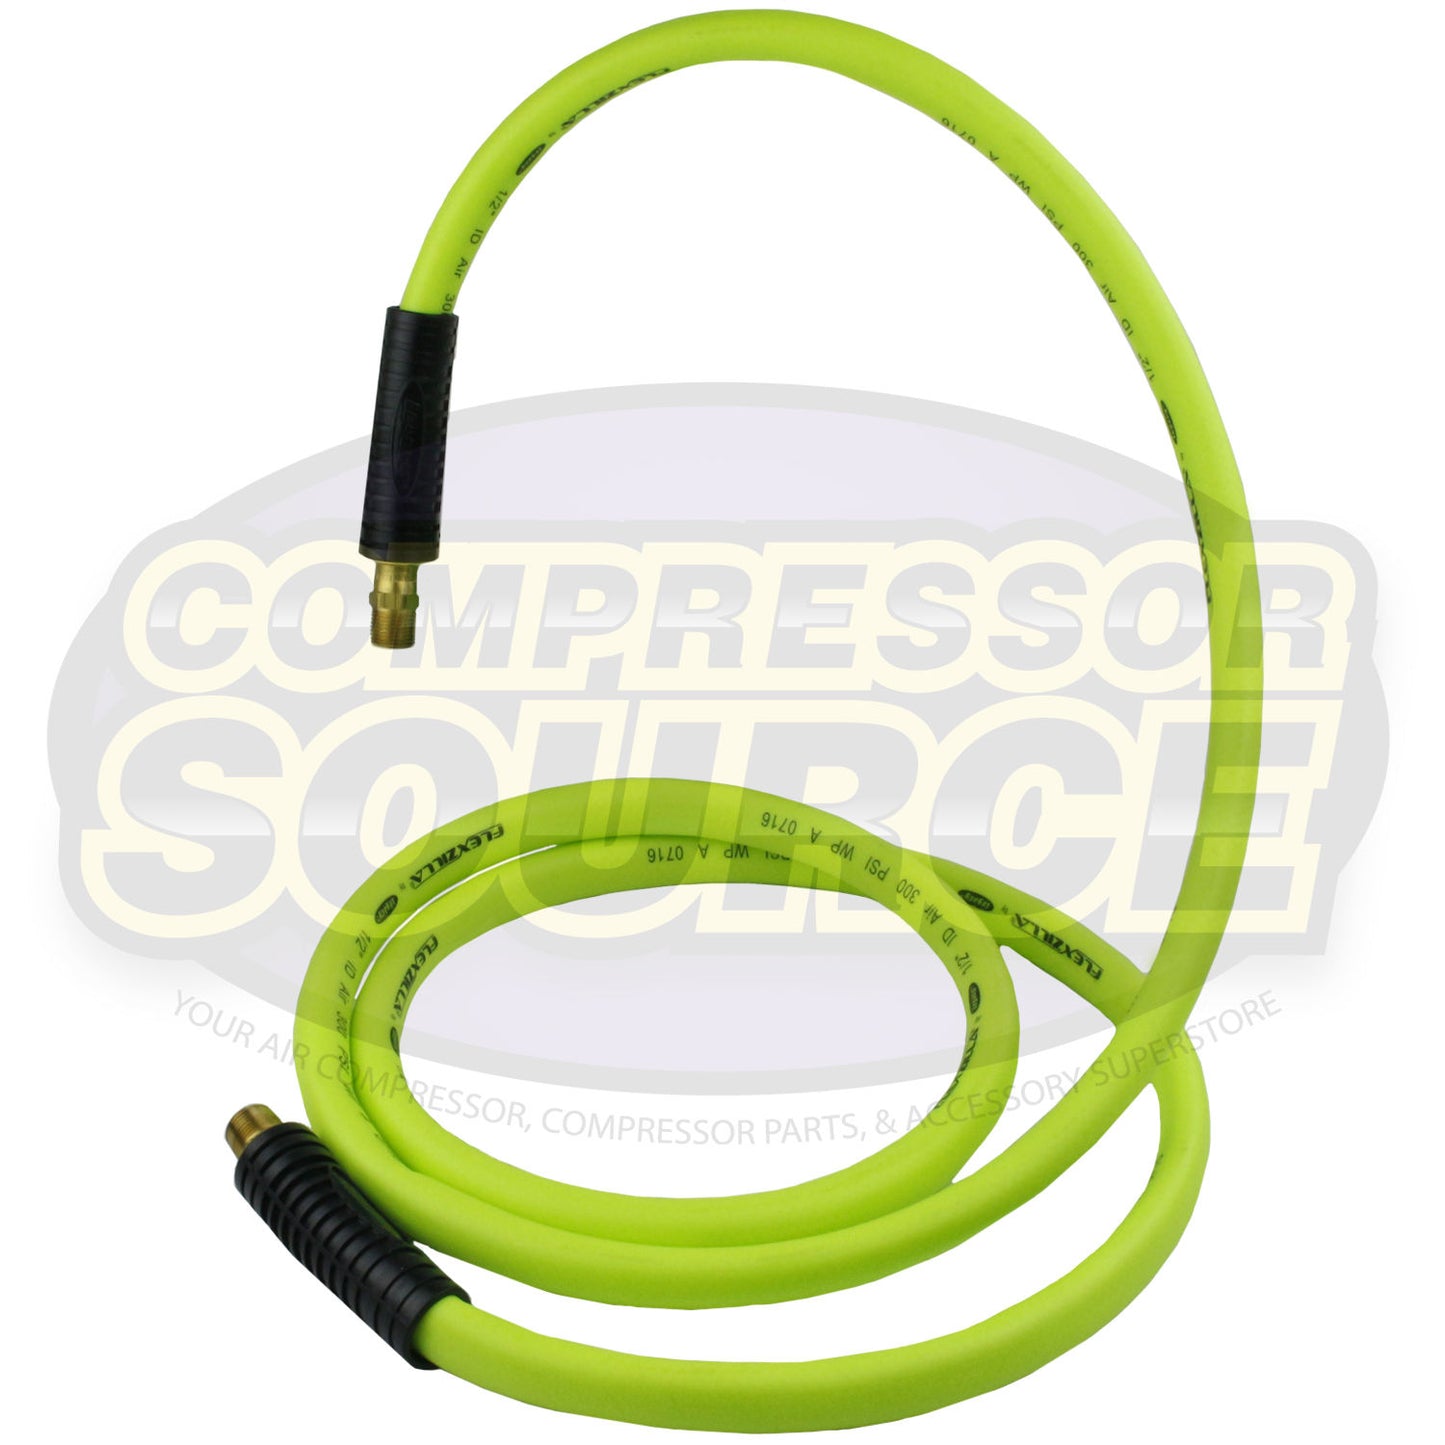 New Flexzilla 1/2" x 8' FT Air Hose Whip With 3/8' MNPT Swivel HFZ1208YW3S